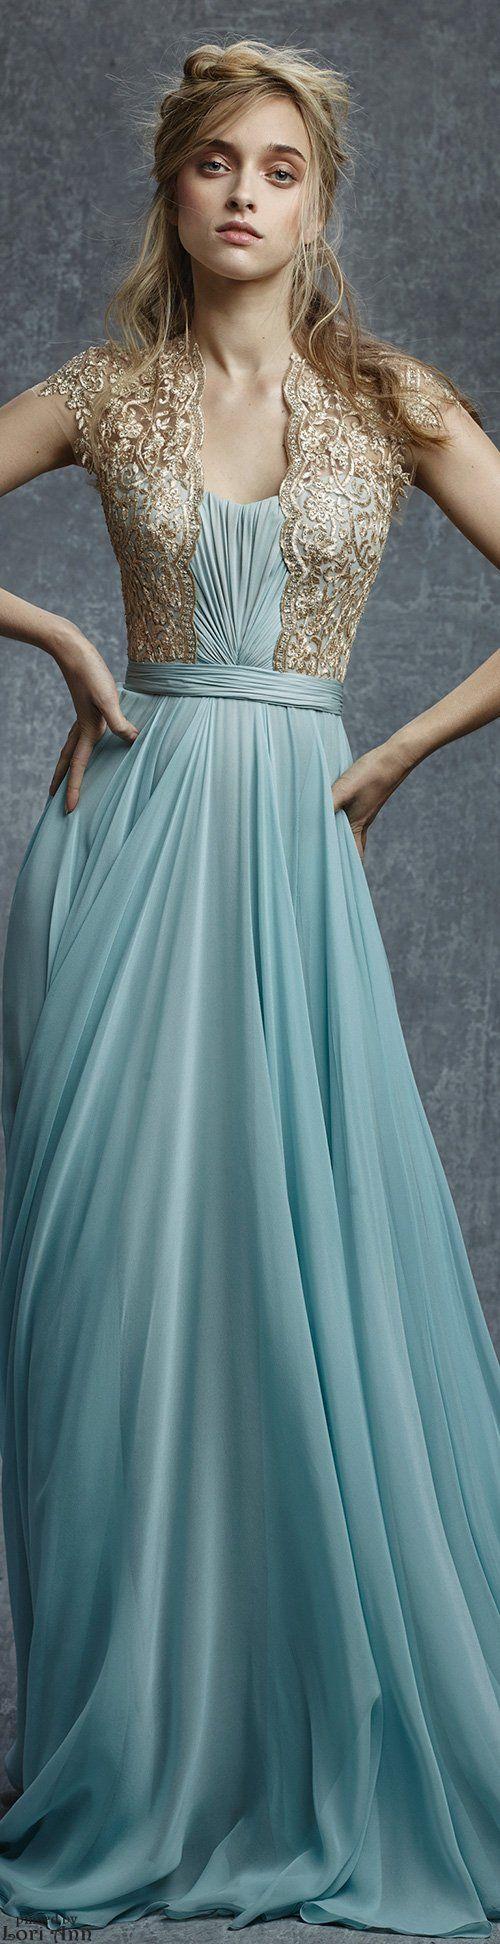 Wedding - Gowns...Amore Acquas